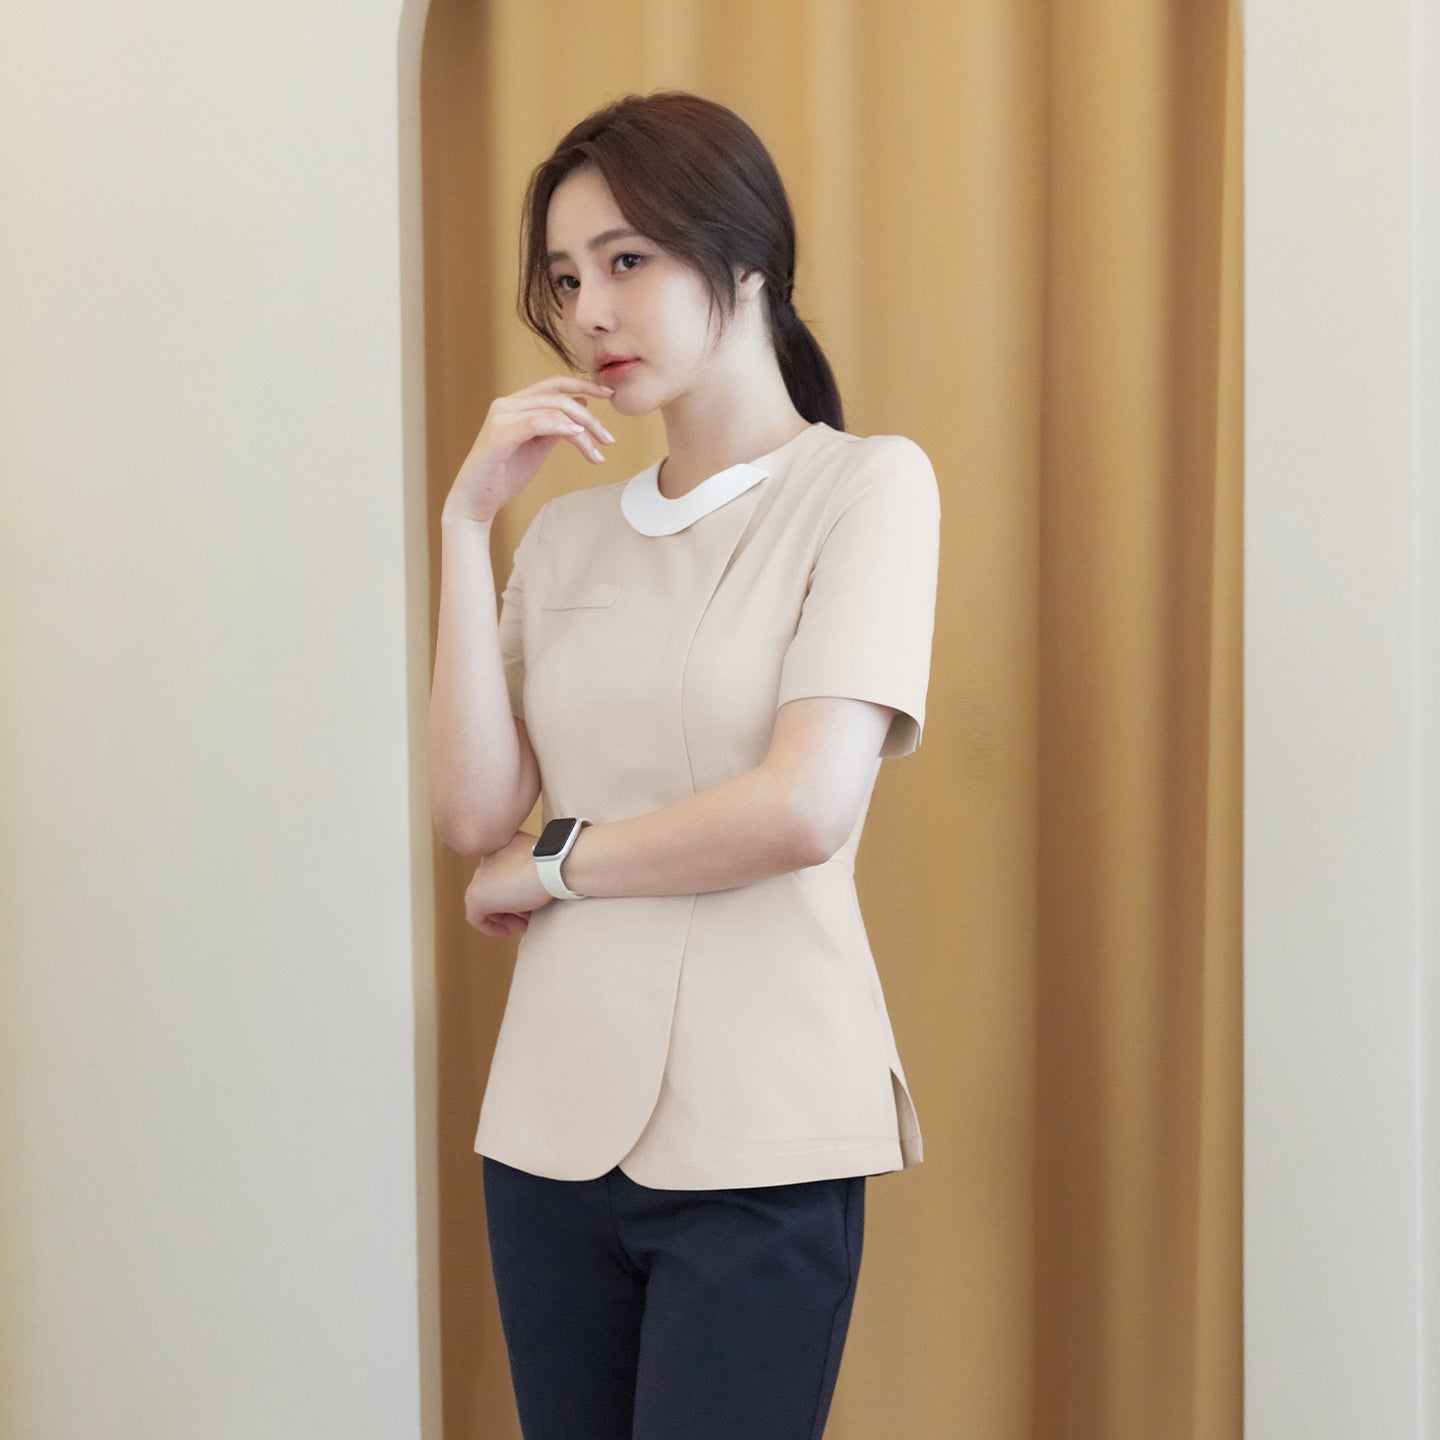 A model wearing a beige round-neck top with a front zipper, paired with dark pants, standing against a light beige and curtain background, looking thoughtful with her hand on her chin,Beige